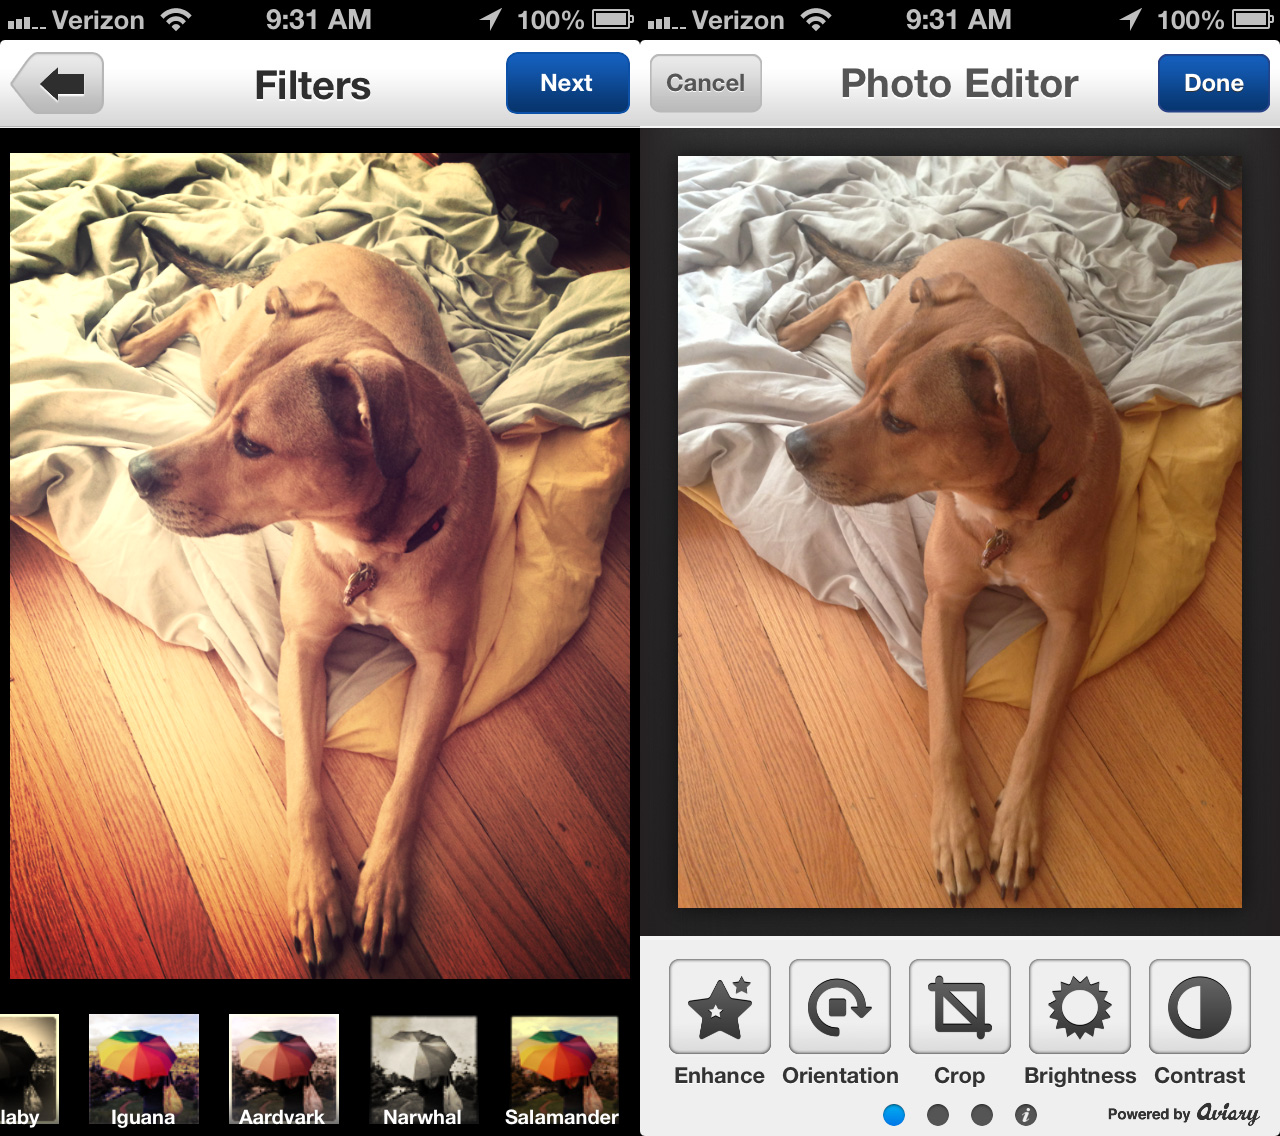 Alternatives to Instagrams selling images for revenue